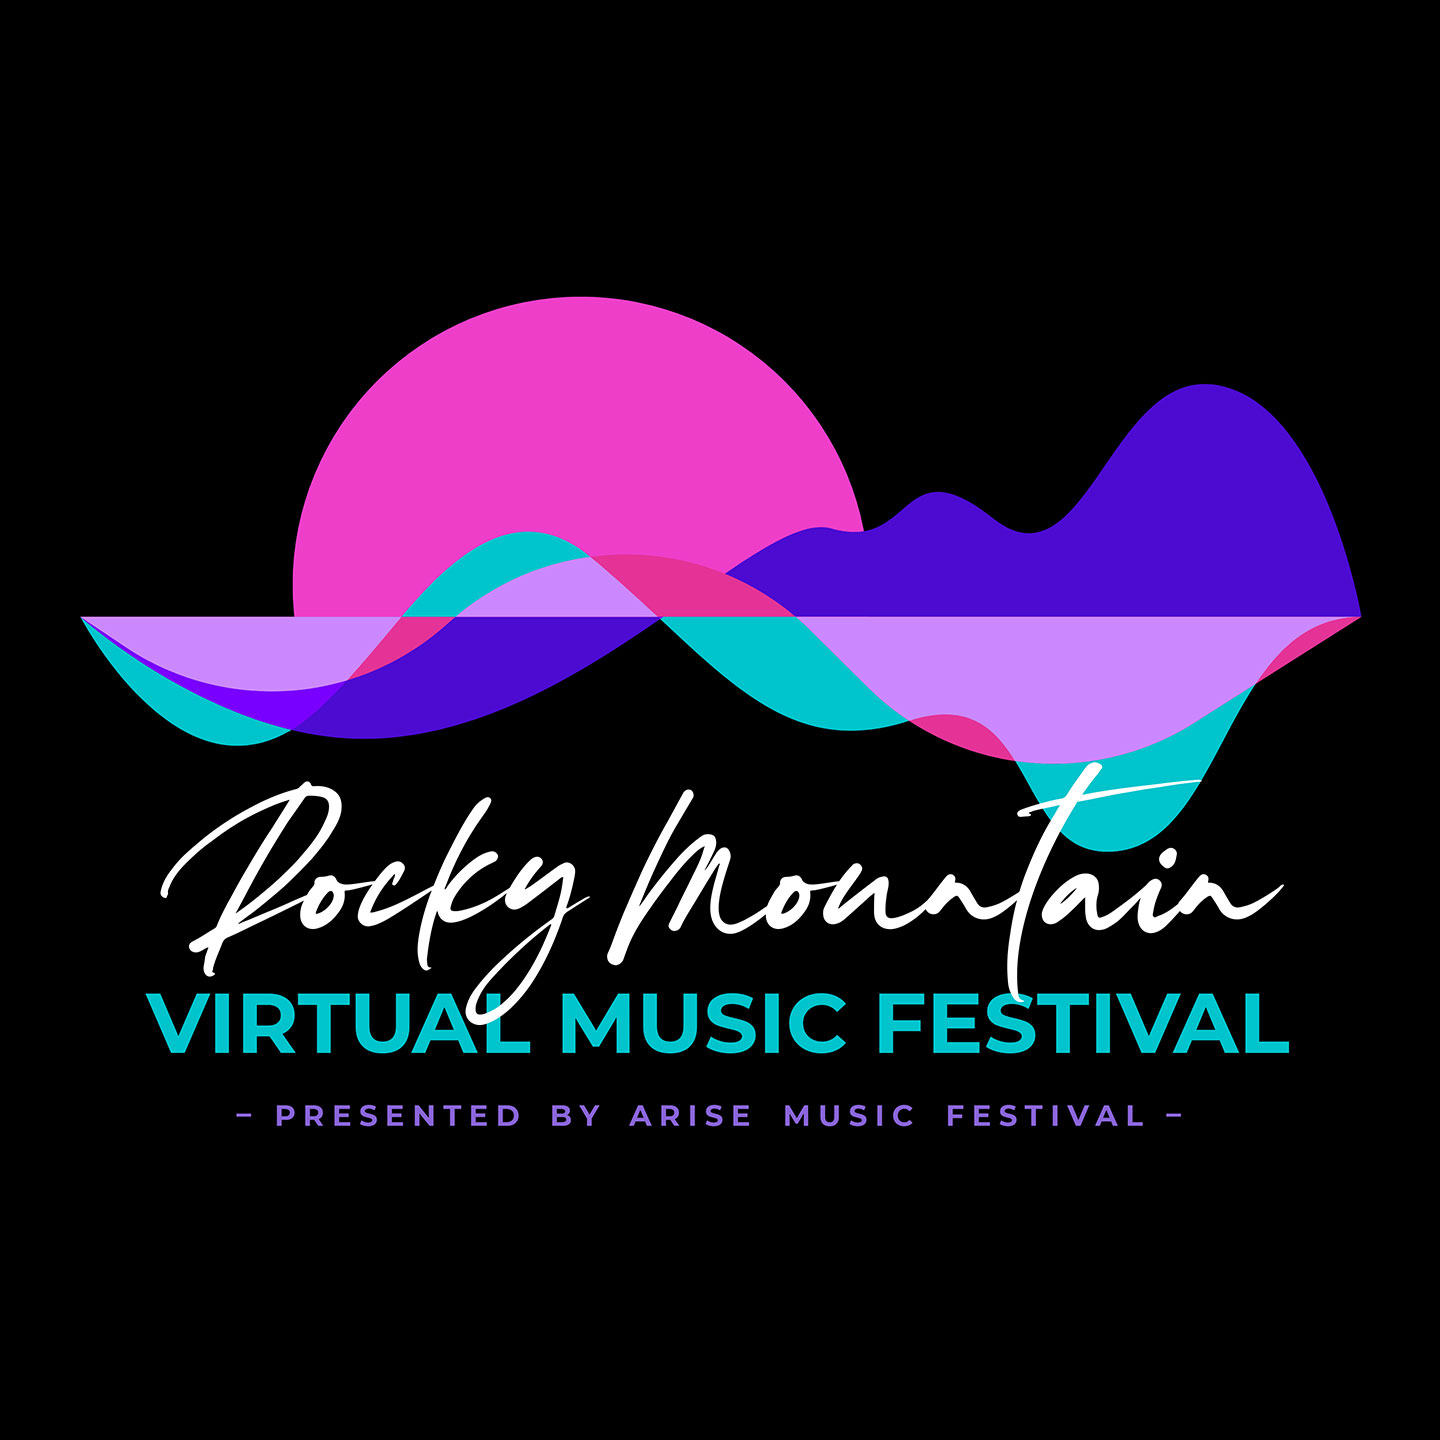 Live Music at Home: Rocky Mountain Virtual Music Festival